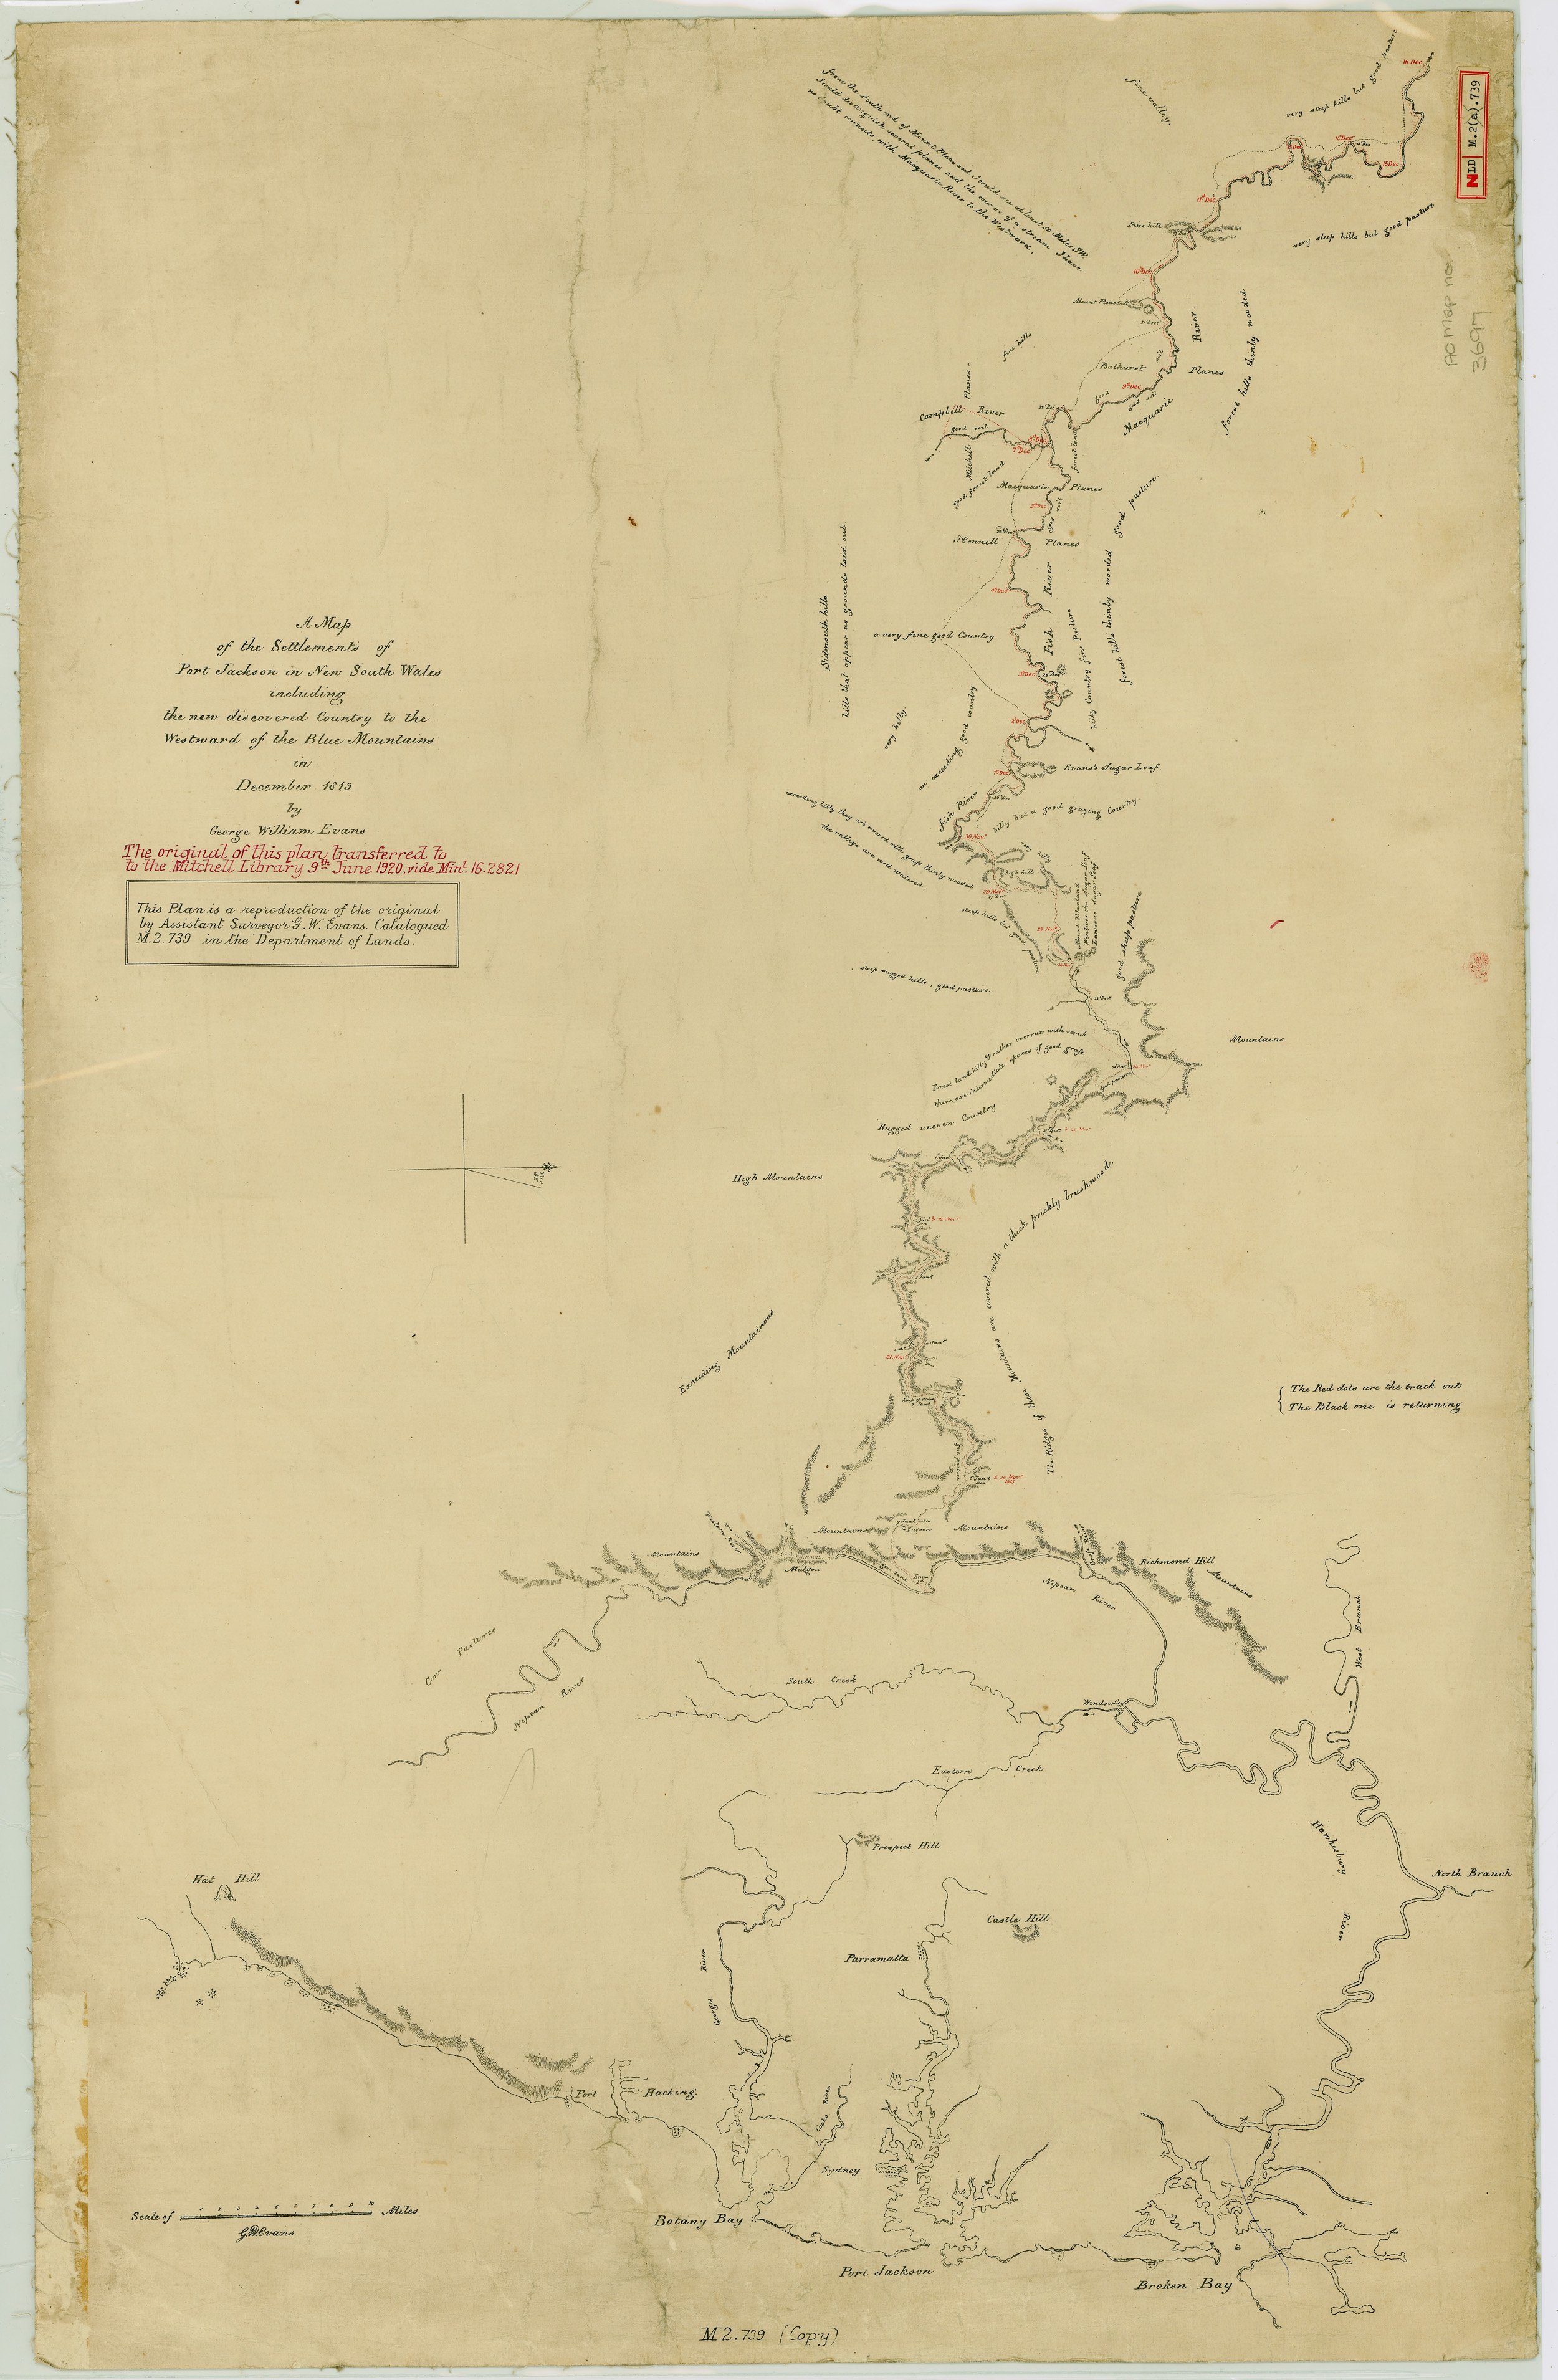 A Map of the Settlements of Port Jackson in New South Wales including the new discovered Country to the Westward of the Blue Mountains in December 1813 by George William Evans - SR Map 3697